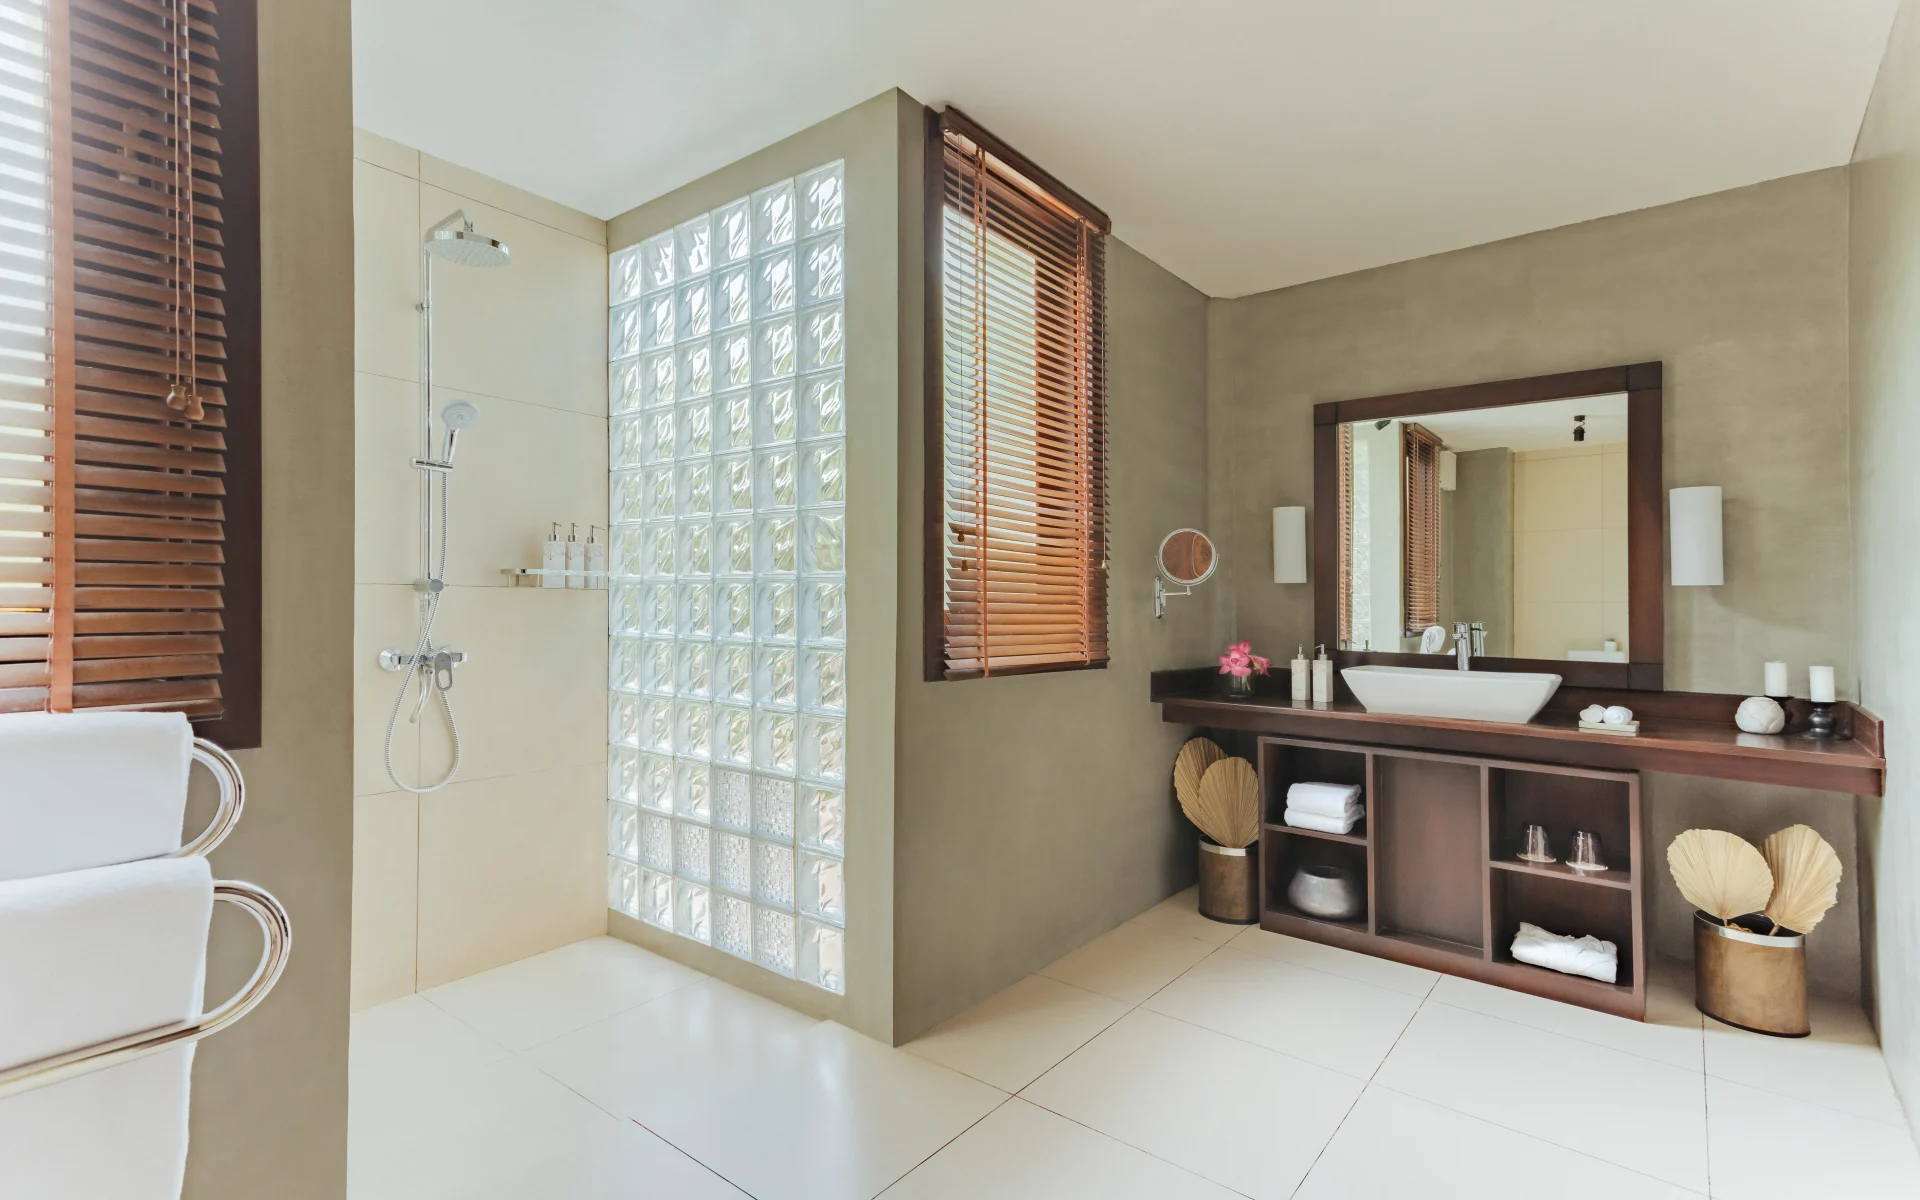 The private bathrooms are sleek with tiled floors and walk-in showers.